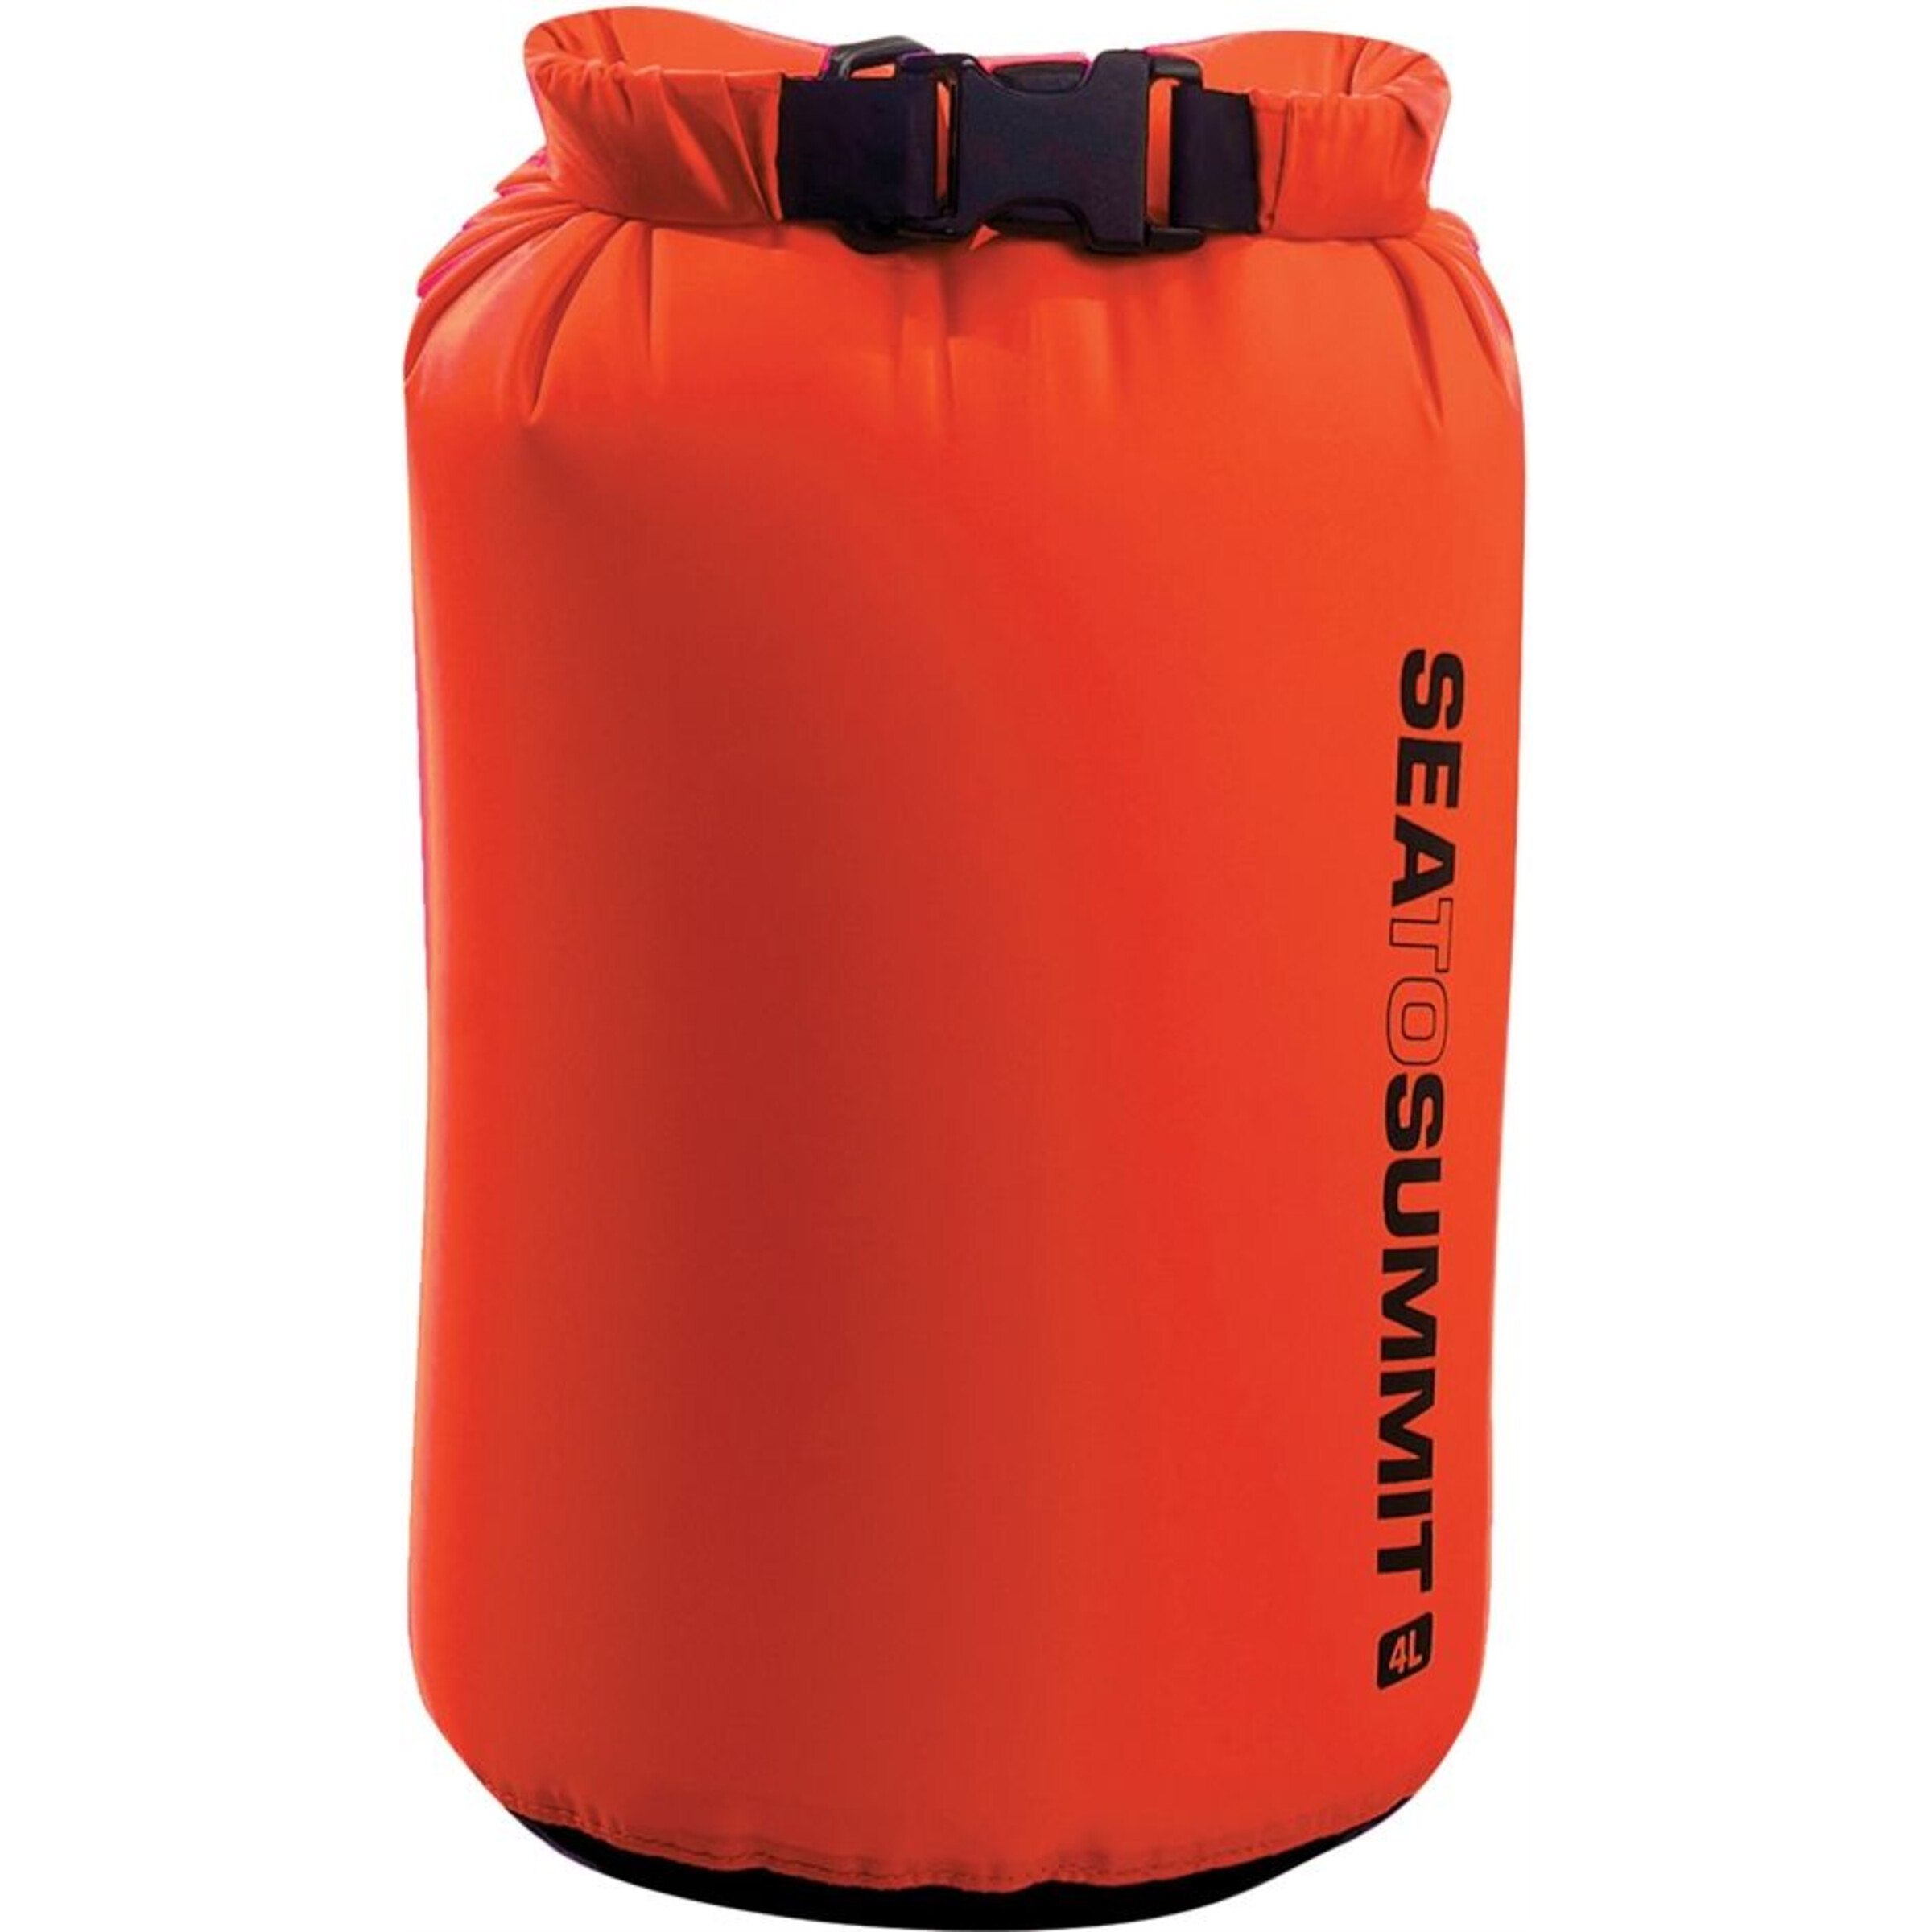 sea-to-summit-dry-sack-4l-red-1